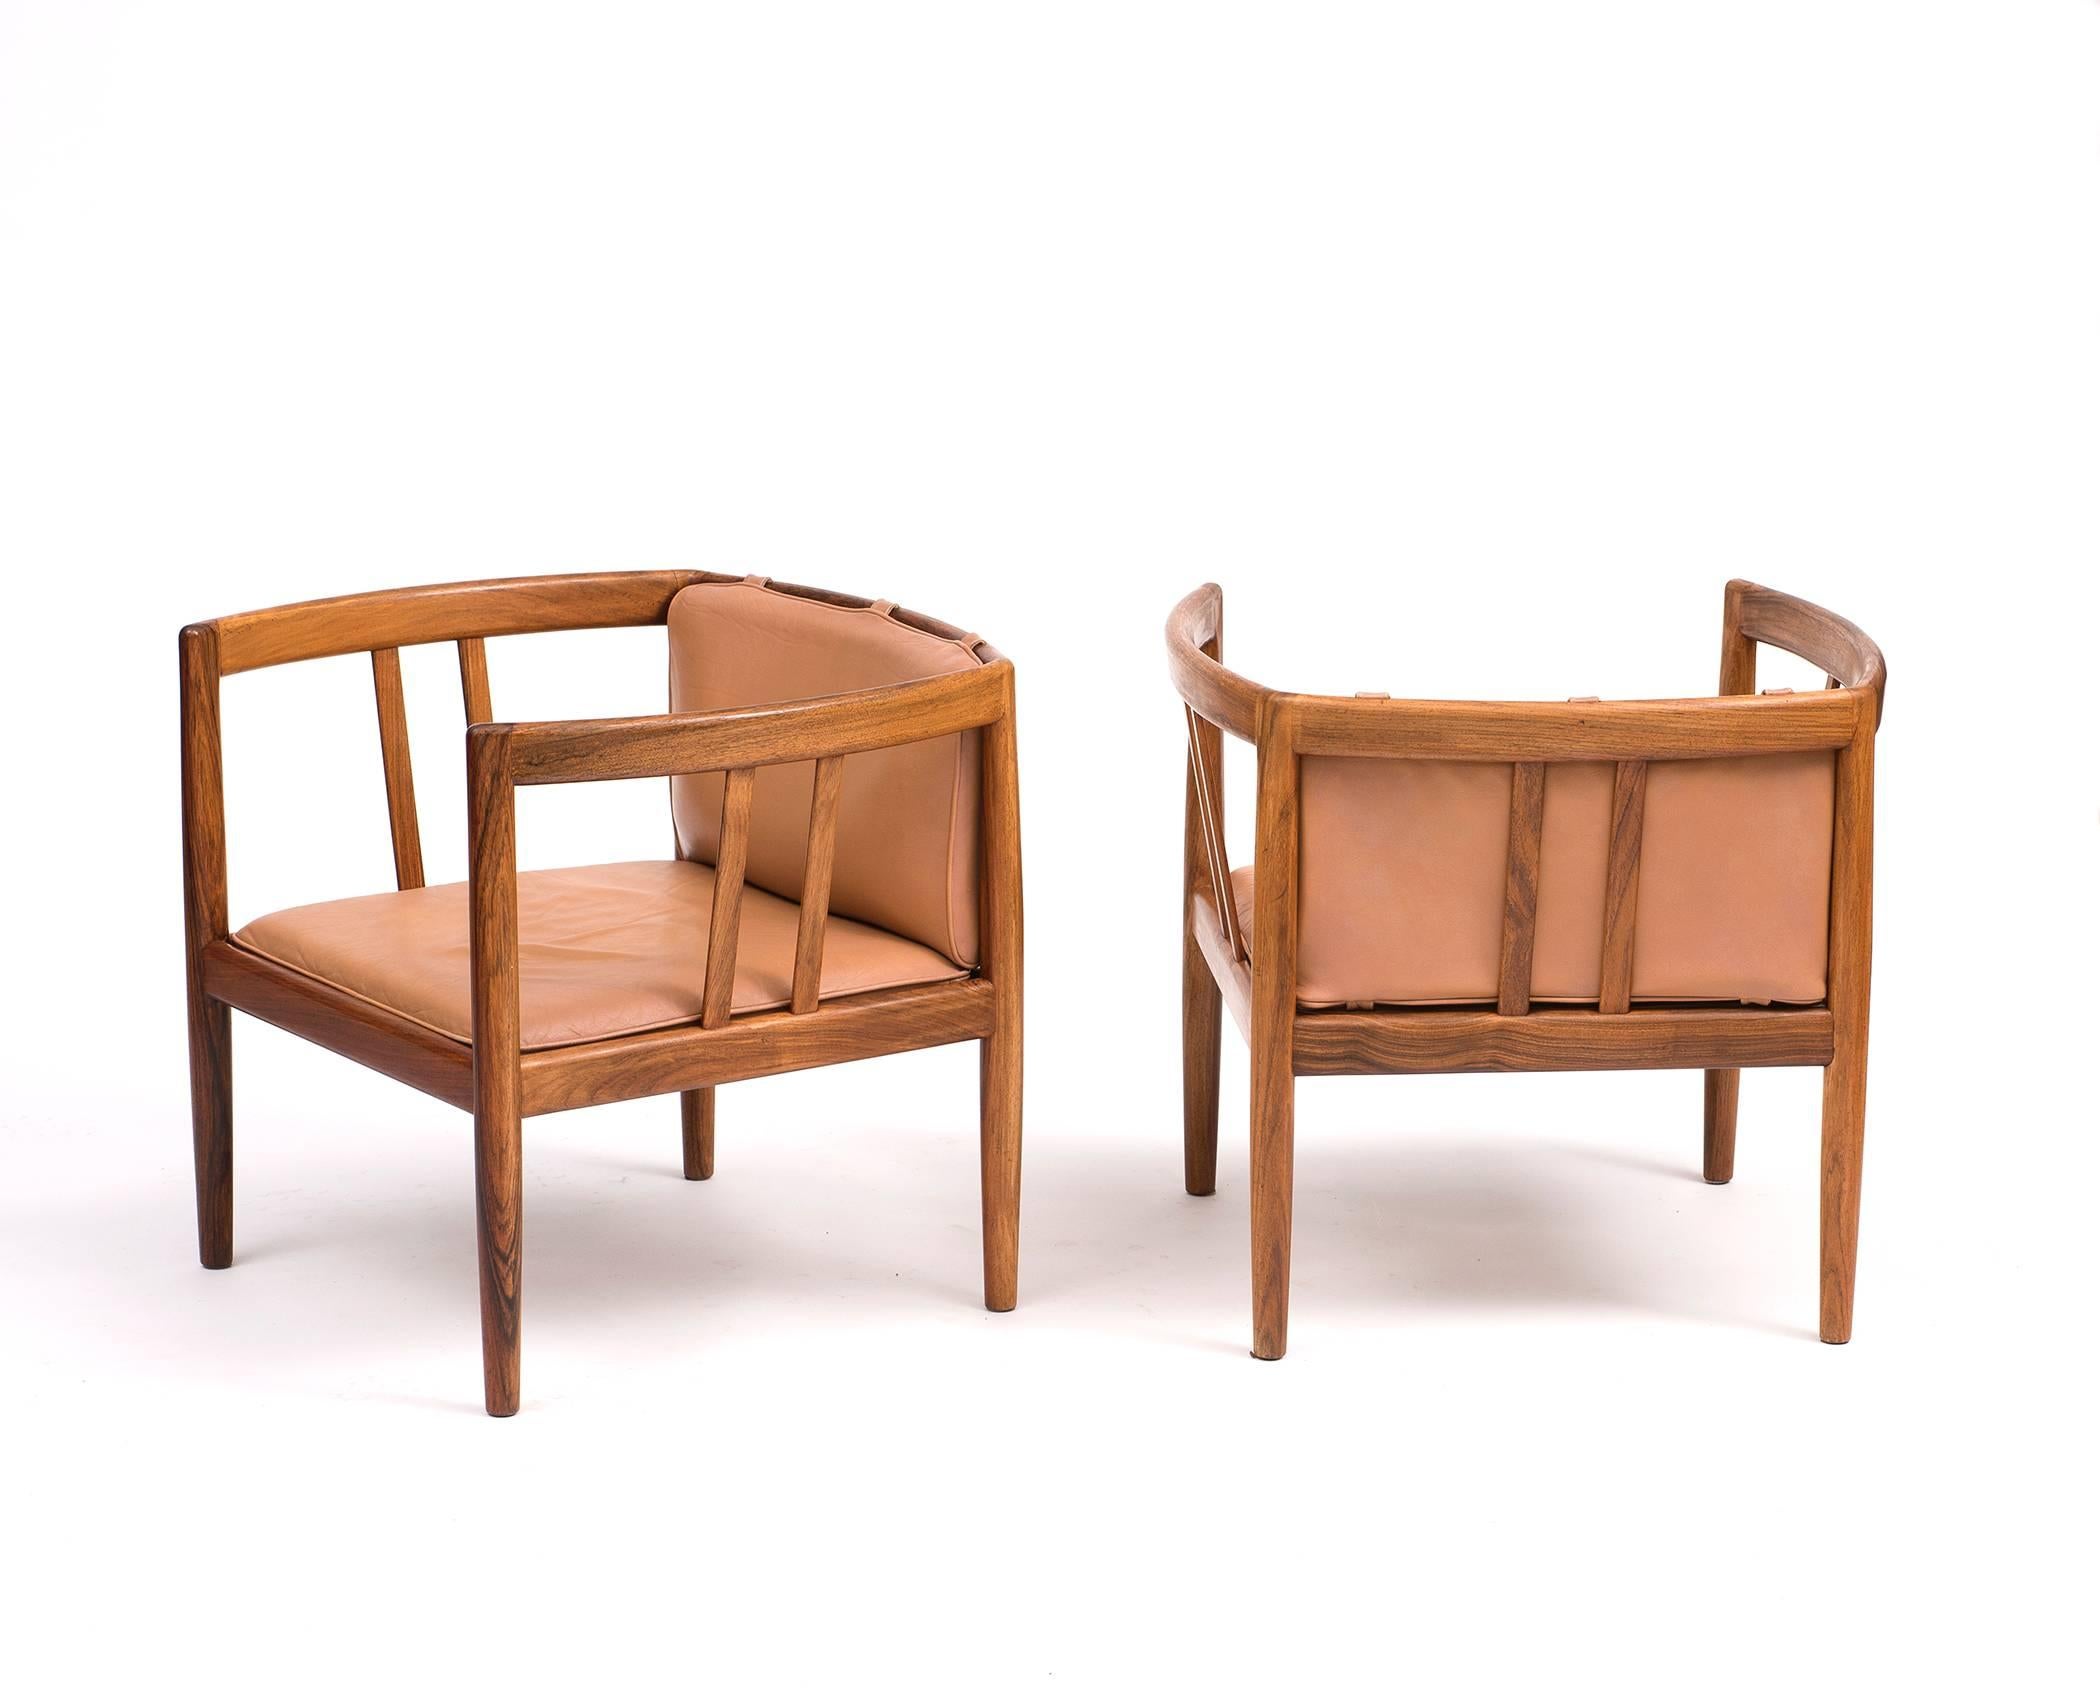 A rare pair of rosewood and leather lounge chairs by Illum Wikkelso for Holger Christiansen, 1960s. Gorgeous rosewood grain with perfectly patinated leather cushions.